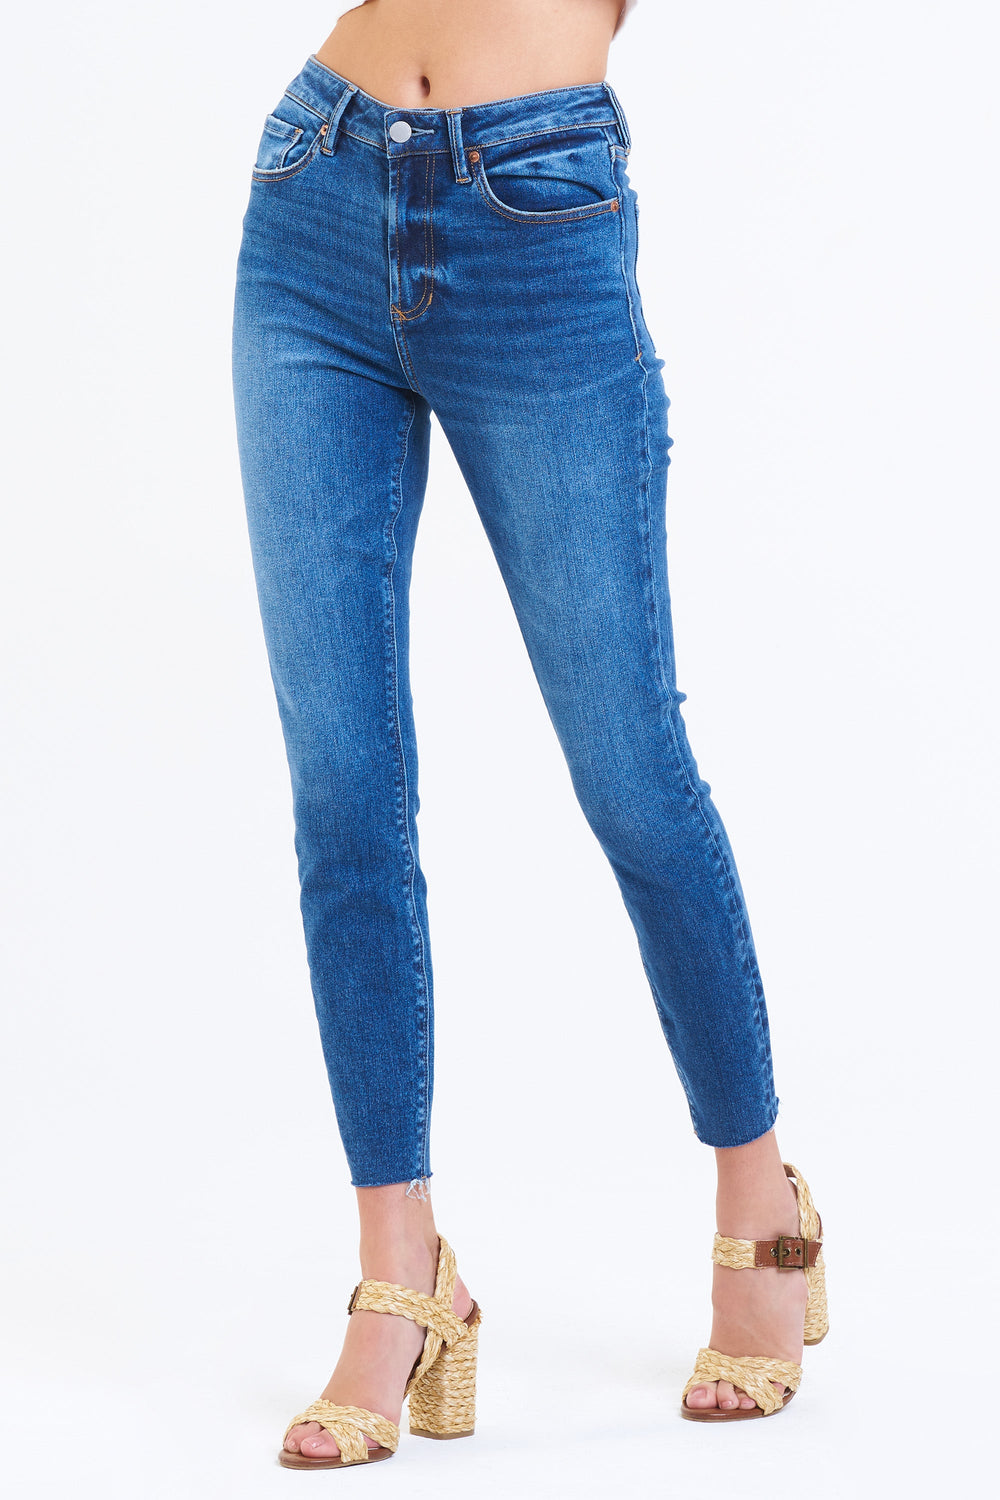 image of a female model wearing a OLIVIA SUPER HIGH RISE ANKLE SKINNY JEANS ATHENS JEANS